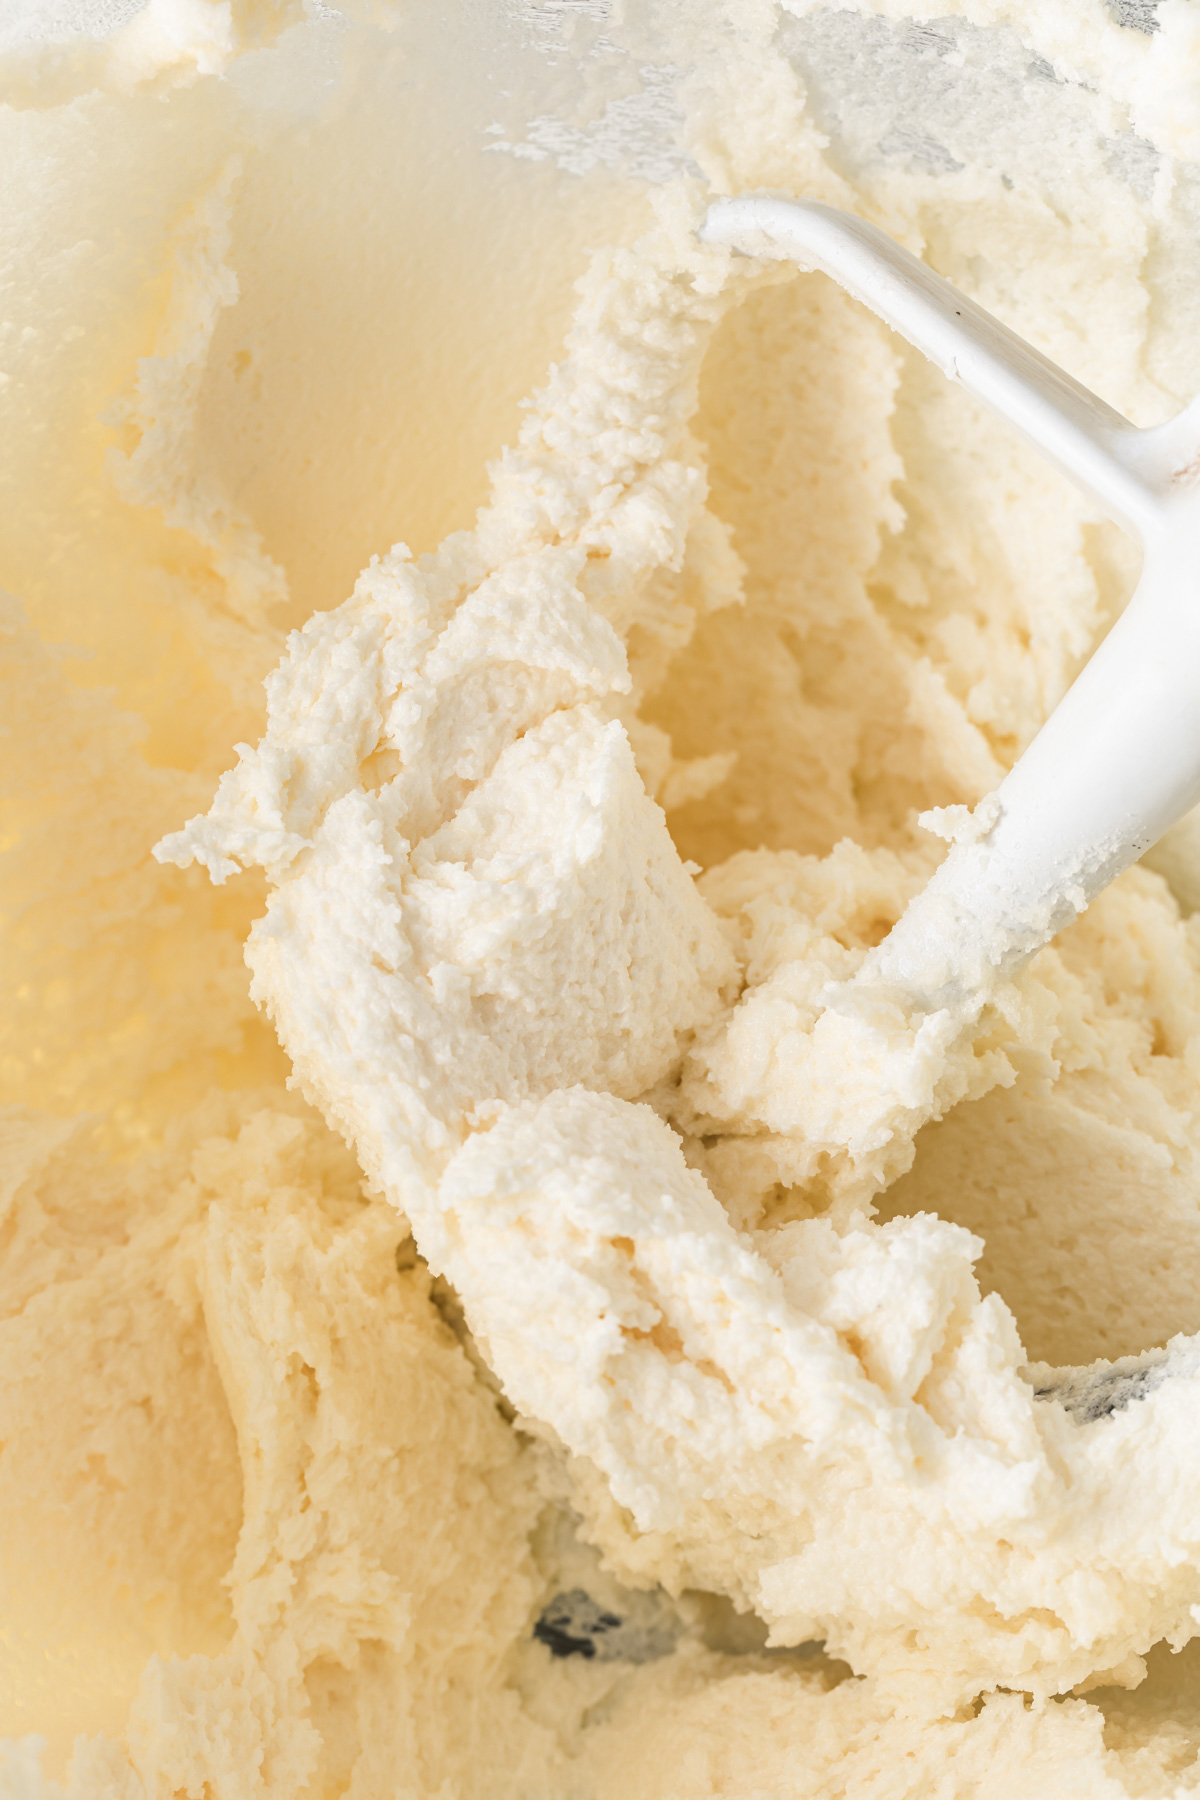 Light and fluffy creamed butter and sugar for cake batter